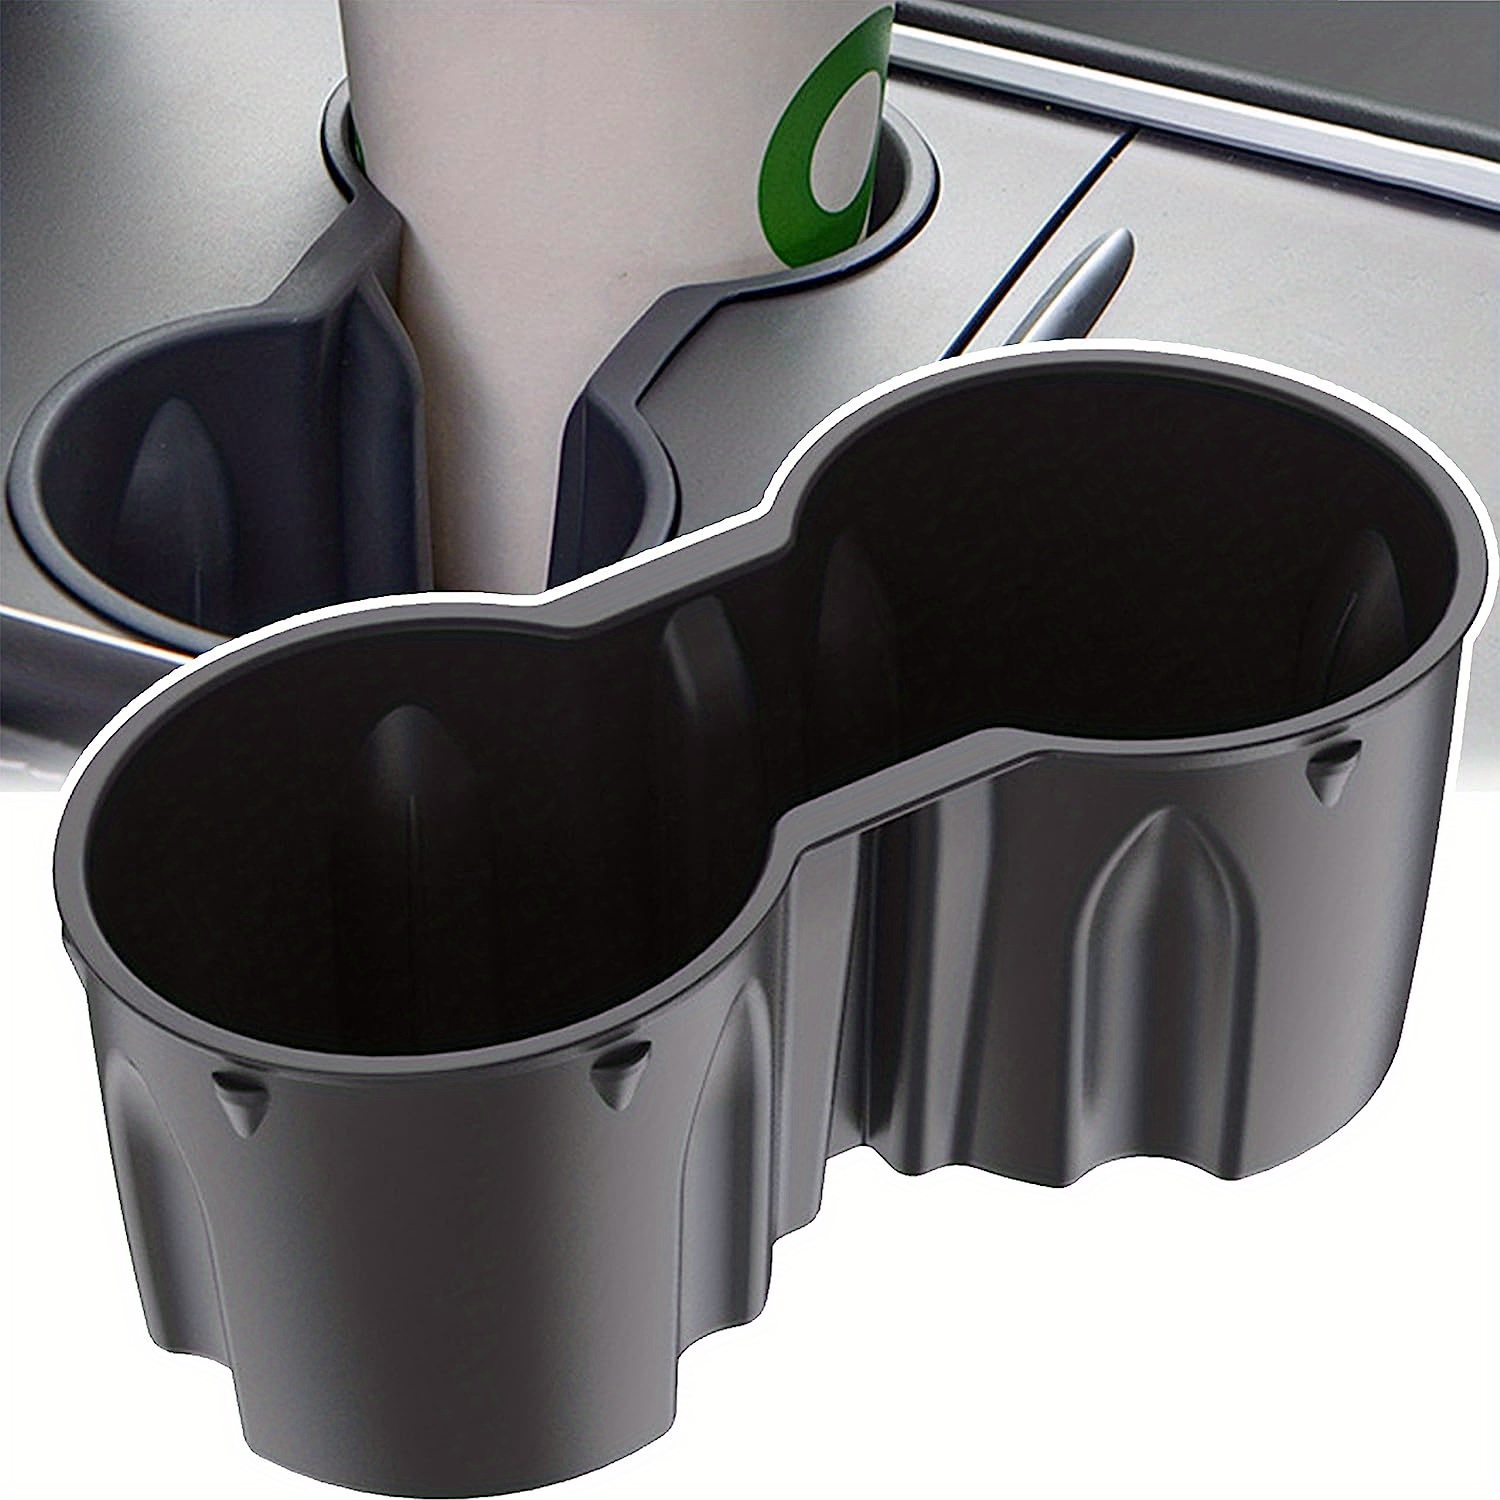 Silicone Cup Holder, Silicone Cup Holder Insert